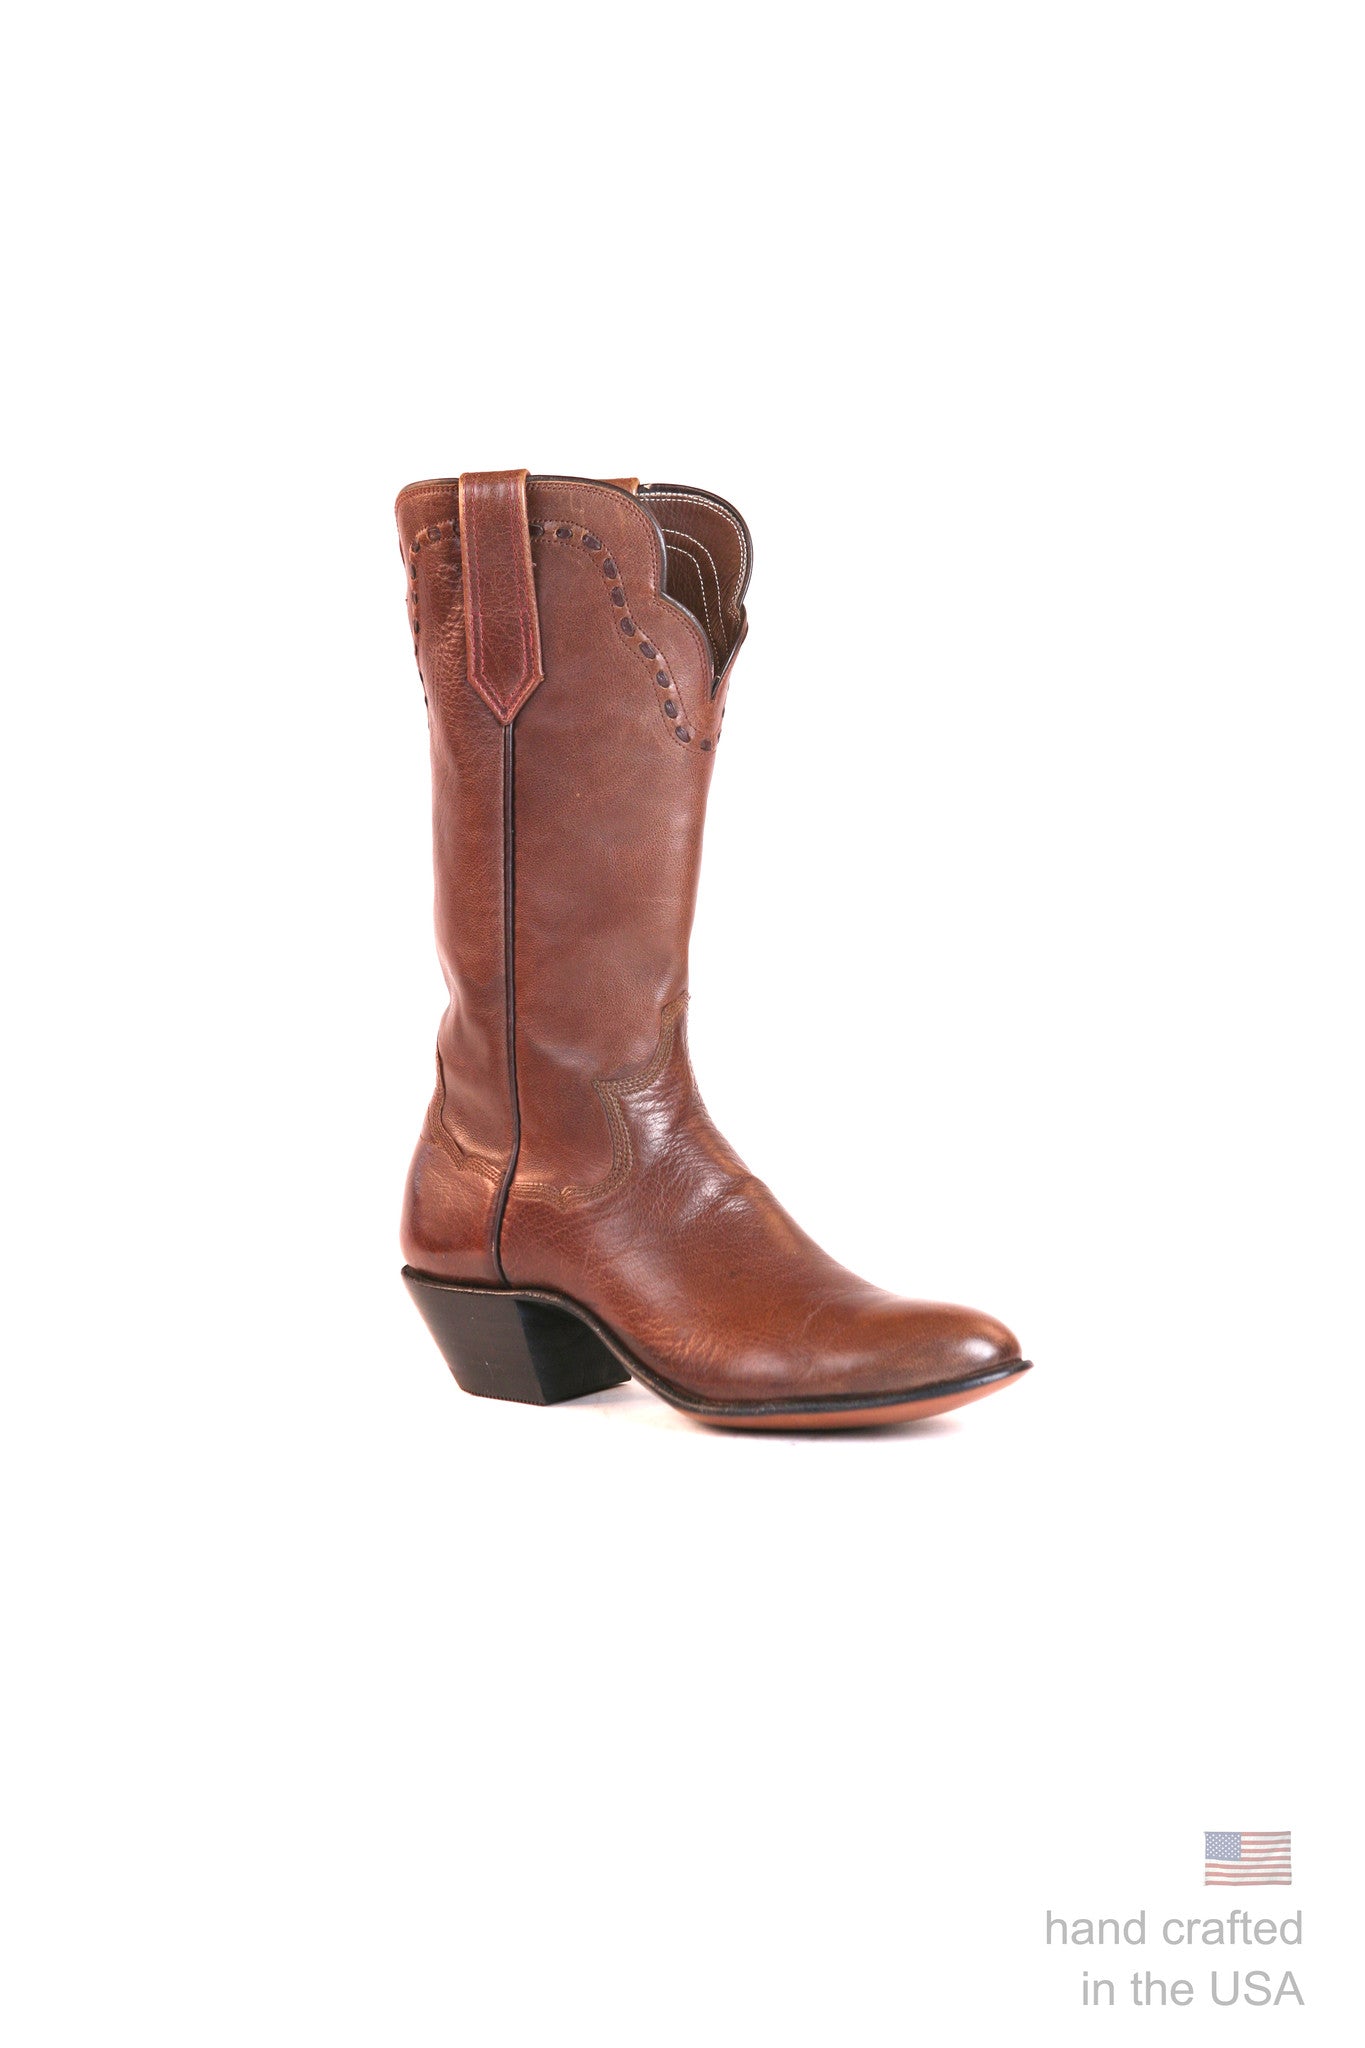 Singles: Boot 0081: Size 6.5 A